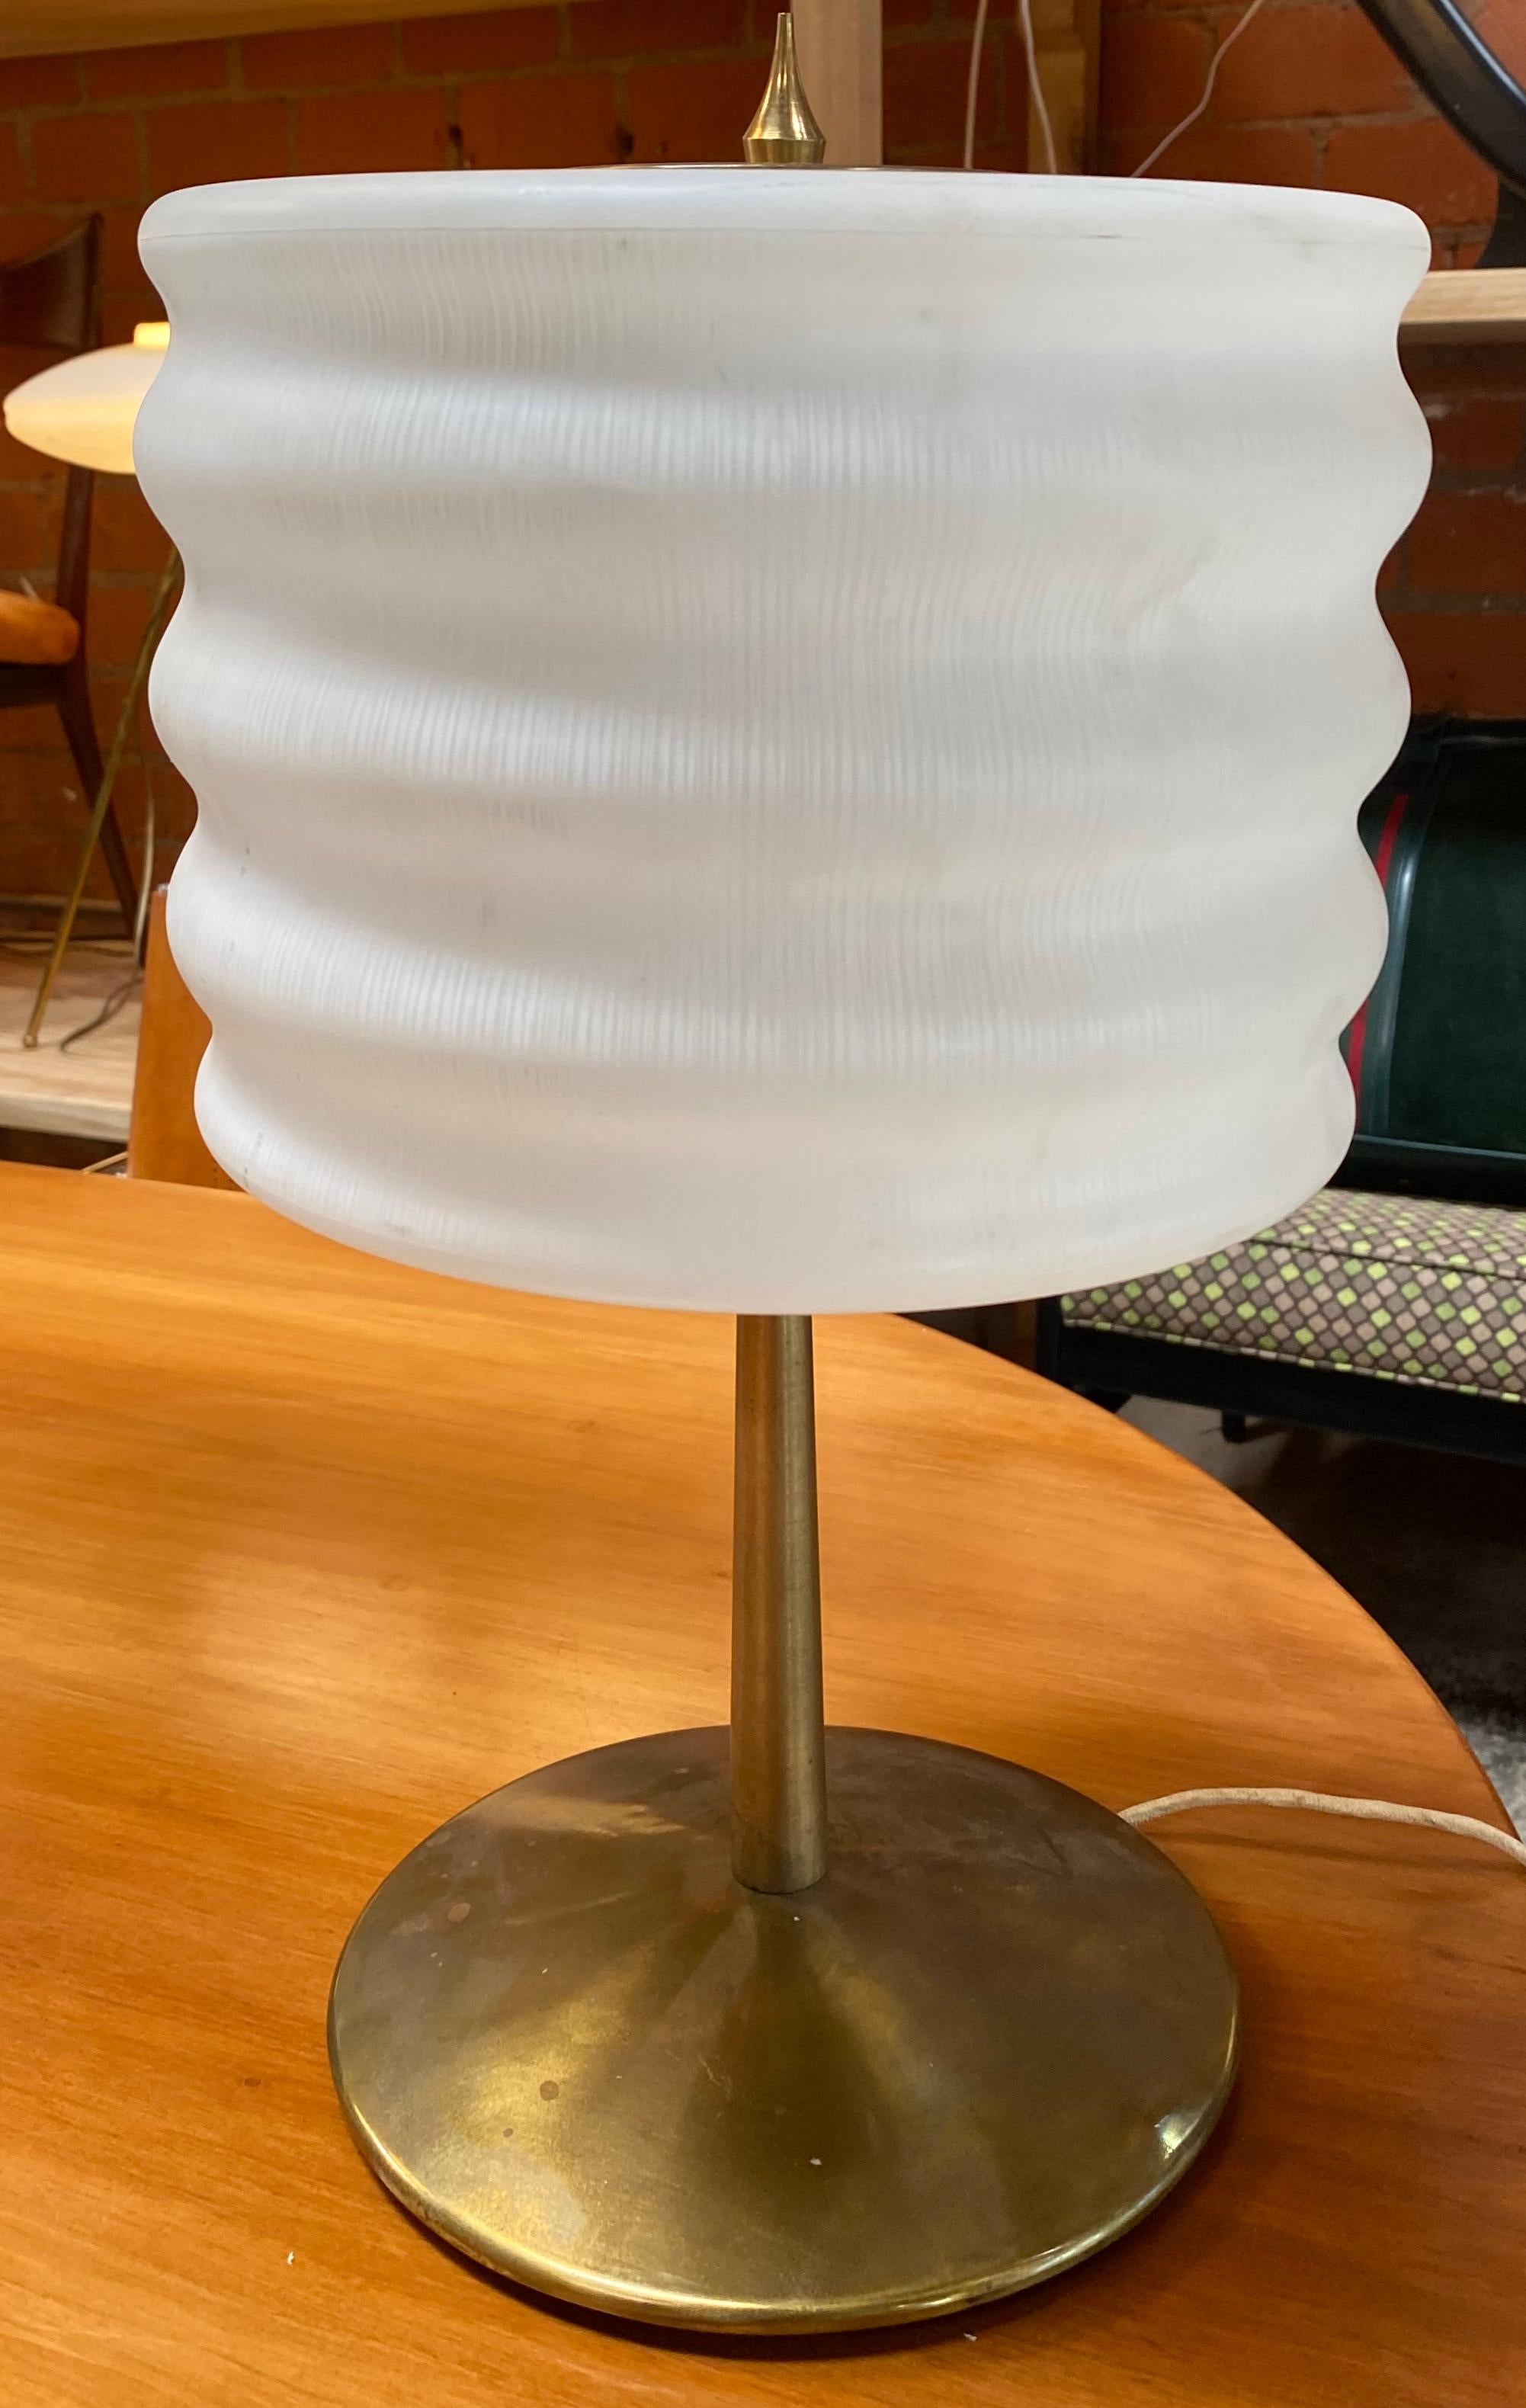 A brass and glass table lamp designed and manufactured by Gaetano Sciolari, name impressed on the bottom. Brass and glass in original patina, circa 1970.